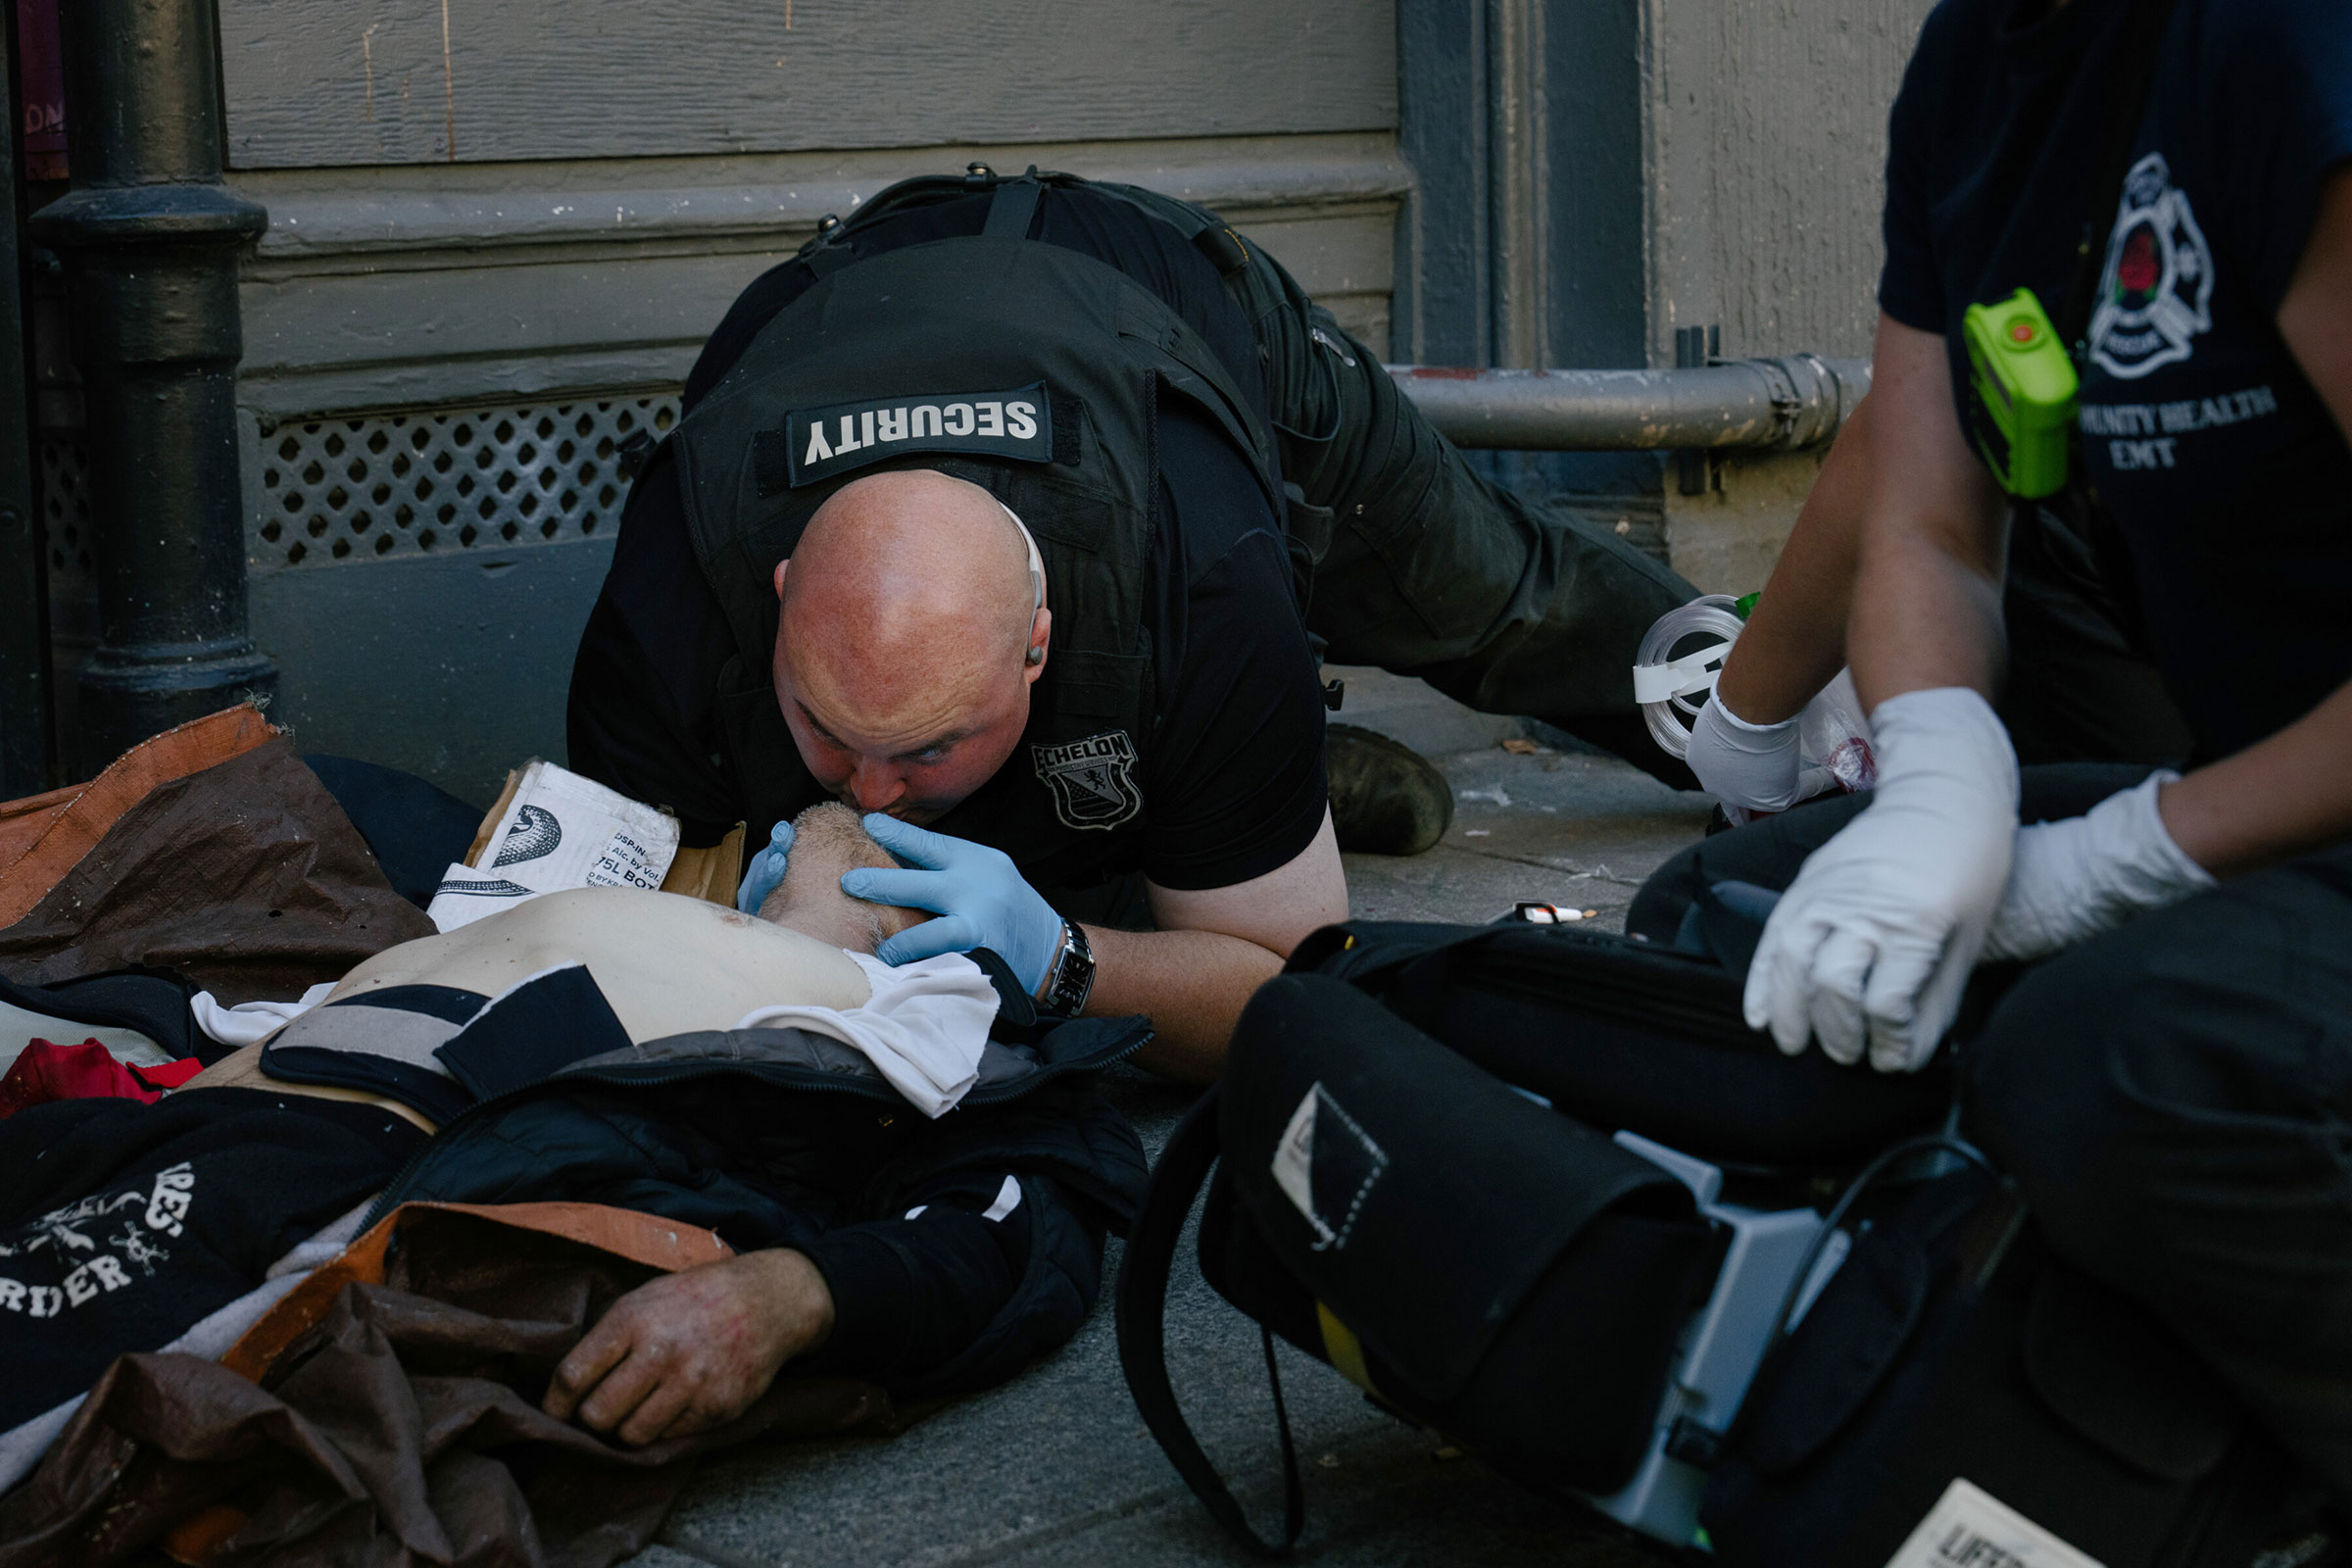 Security guard Michael Bock performs CPR on a man who overdosed, and regained conscious soon after, downtown Portland, Ore., Aug. 2, 2023. (Erin Schaff/The New York Times)